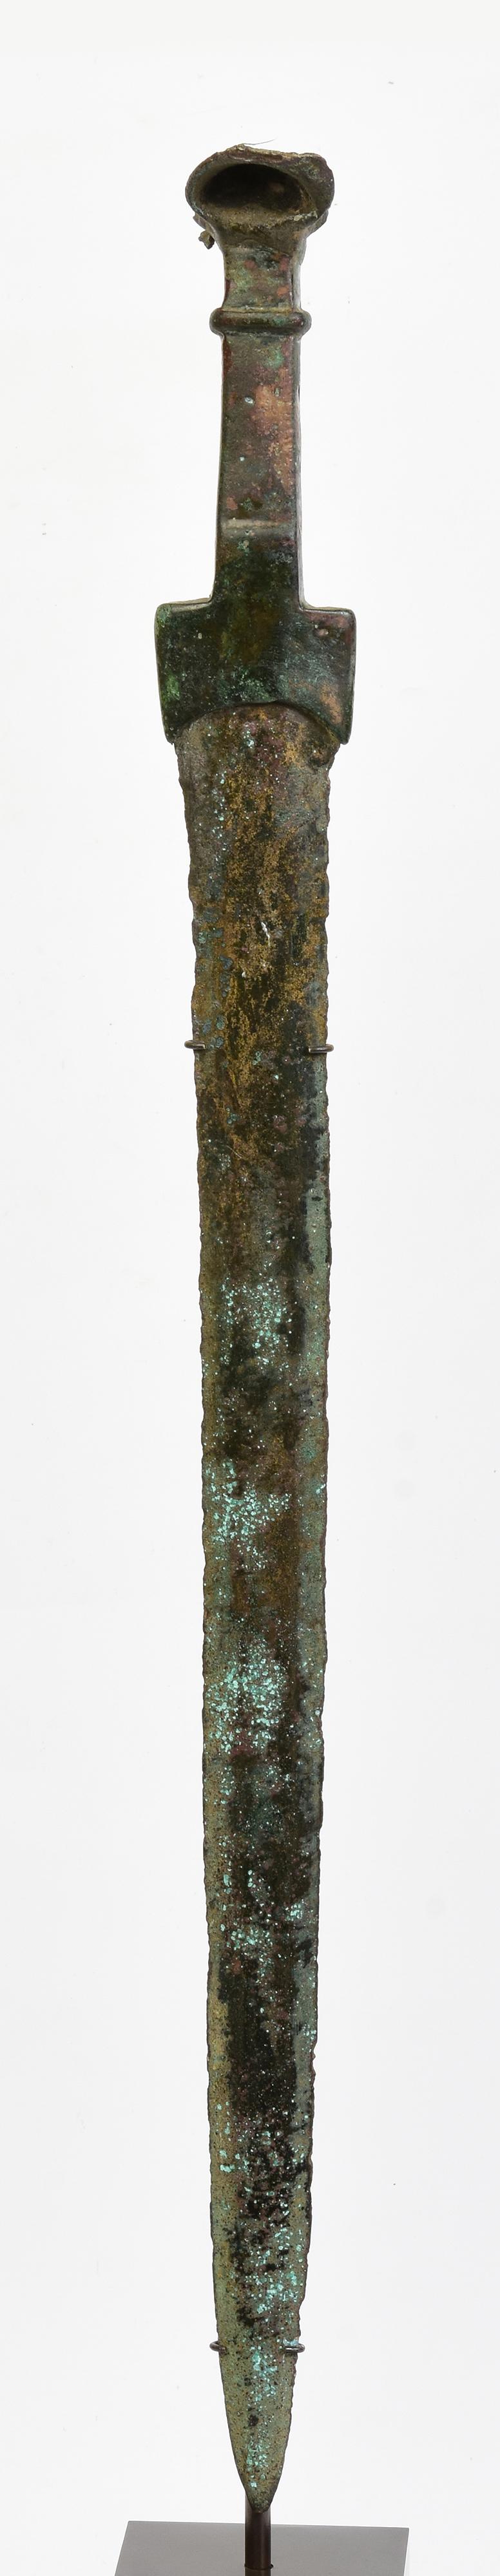 Ancient Luristan bronze sword with green patina.

Luristan bronze comes from the province of Lorestan, a region of nowadays Western Iran in the Zagros Mountains. With its rich and long history, Luristan culture is well-known for its fascinating